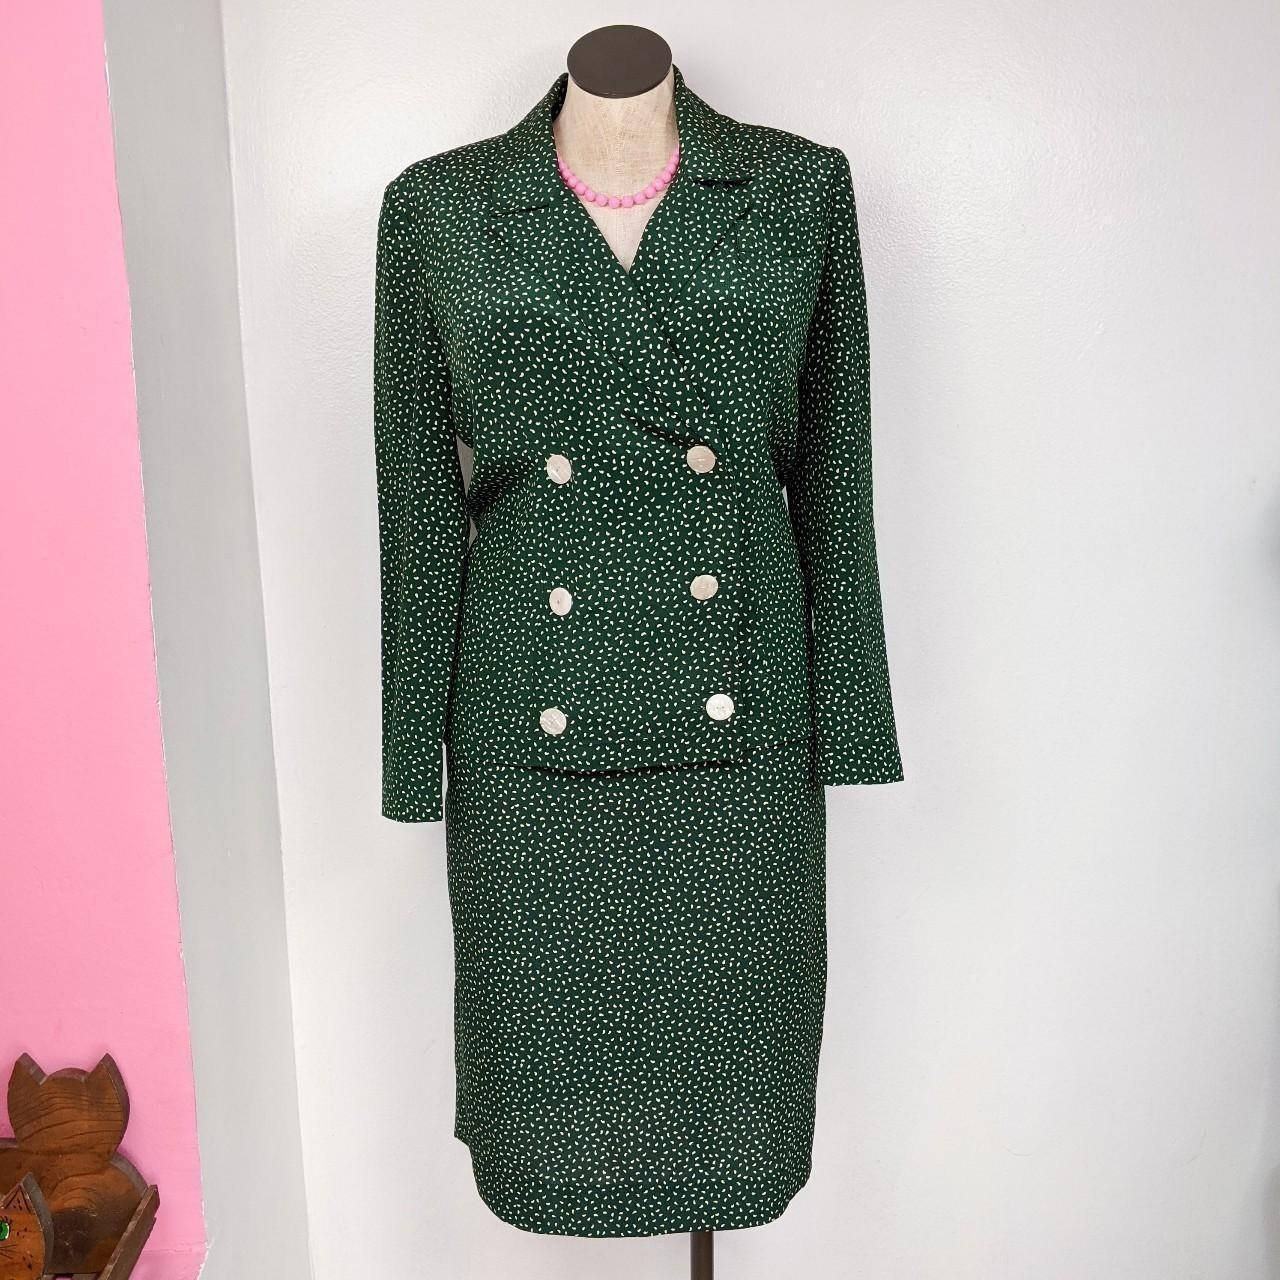 Leslie Fay Women's Green and White Suit | Depop